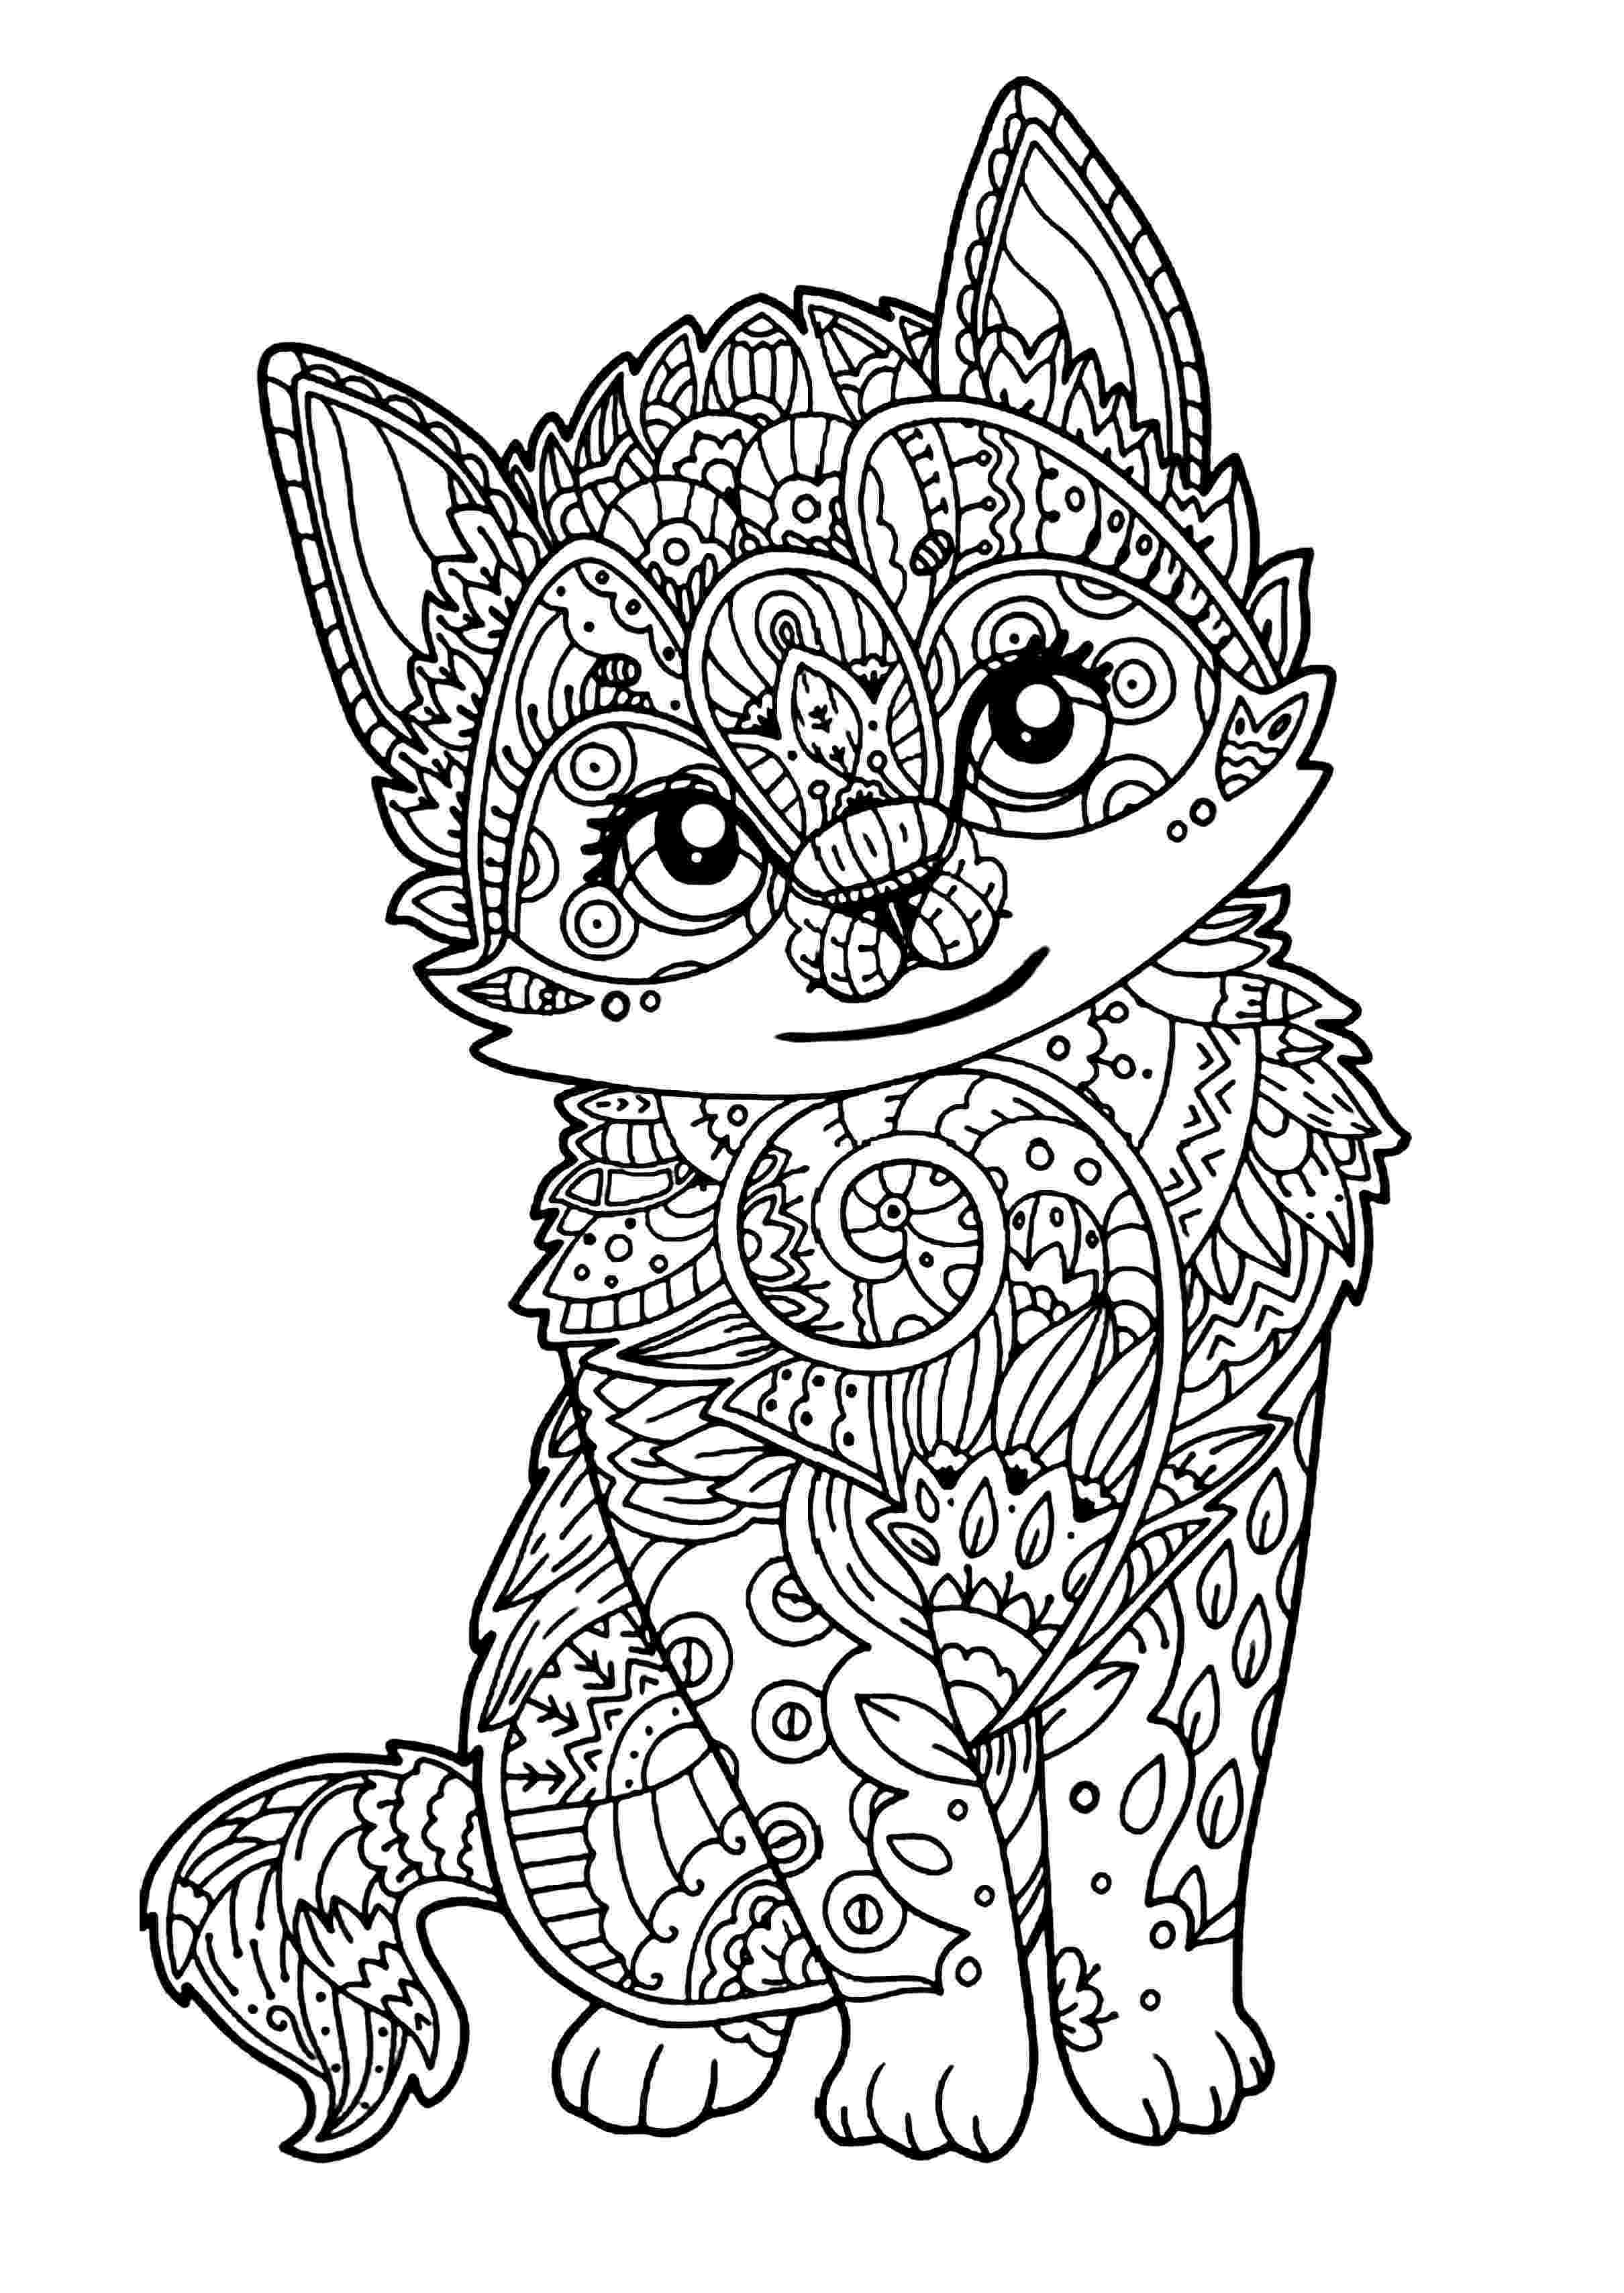 kitty cat coloring pages cat drawing pages at getdrawings free download coloring cat kitty pages 